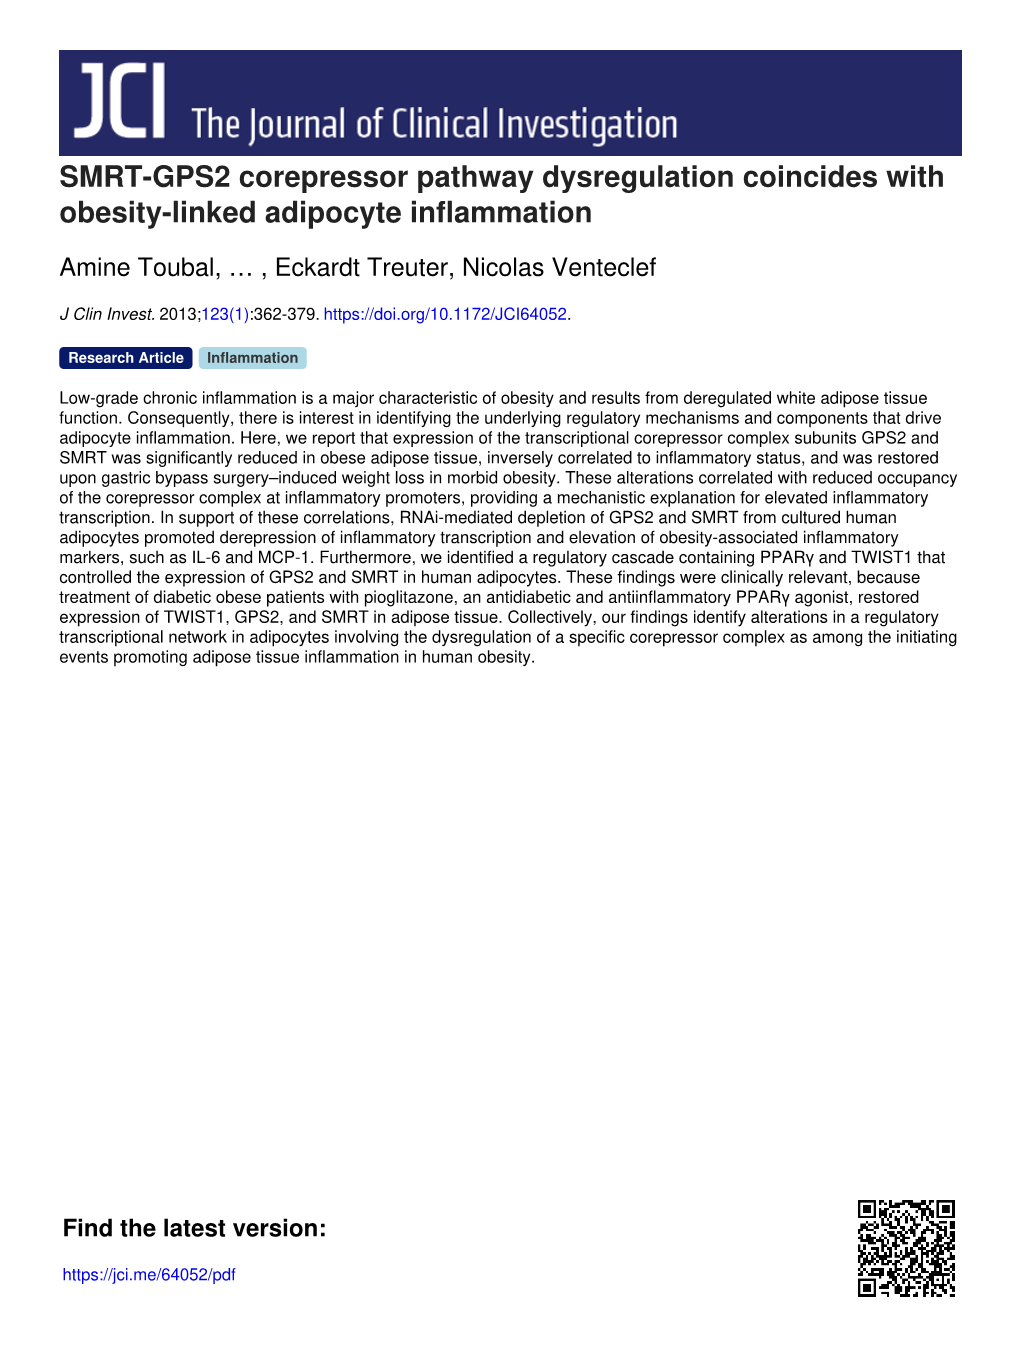 SMRT-GPS2 Corepressor Pathway Dysregulation Coincides with Obesity-Linked Adipocyte Inflammation